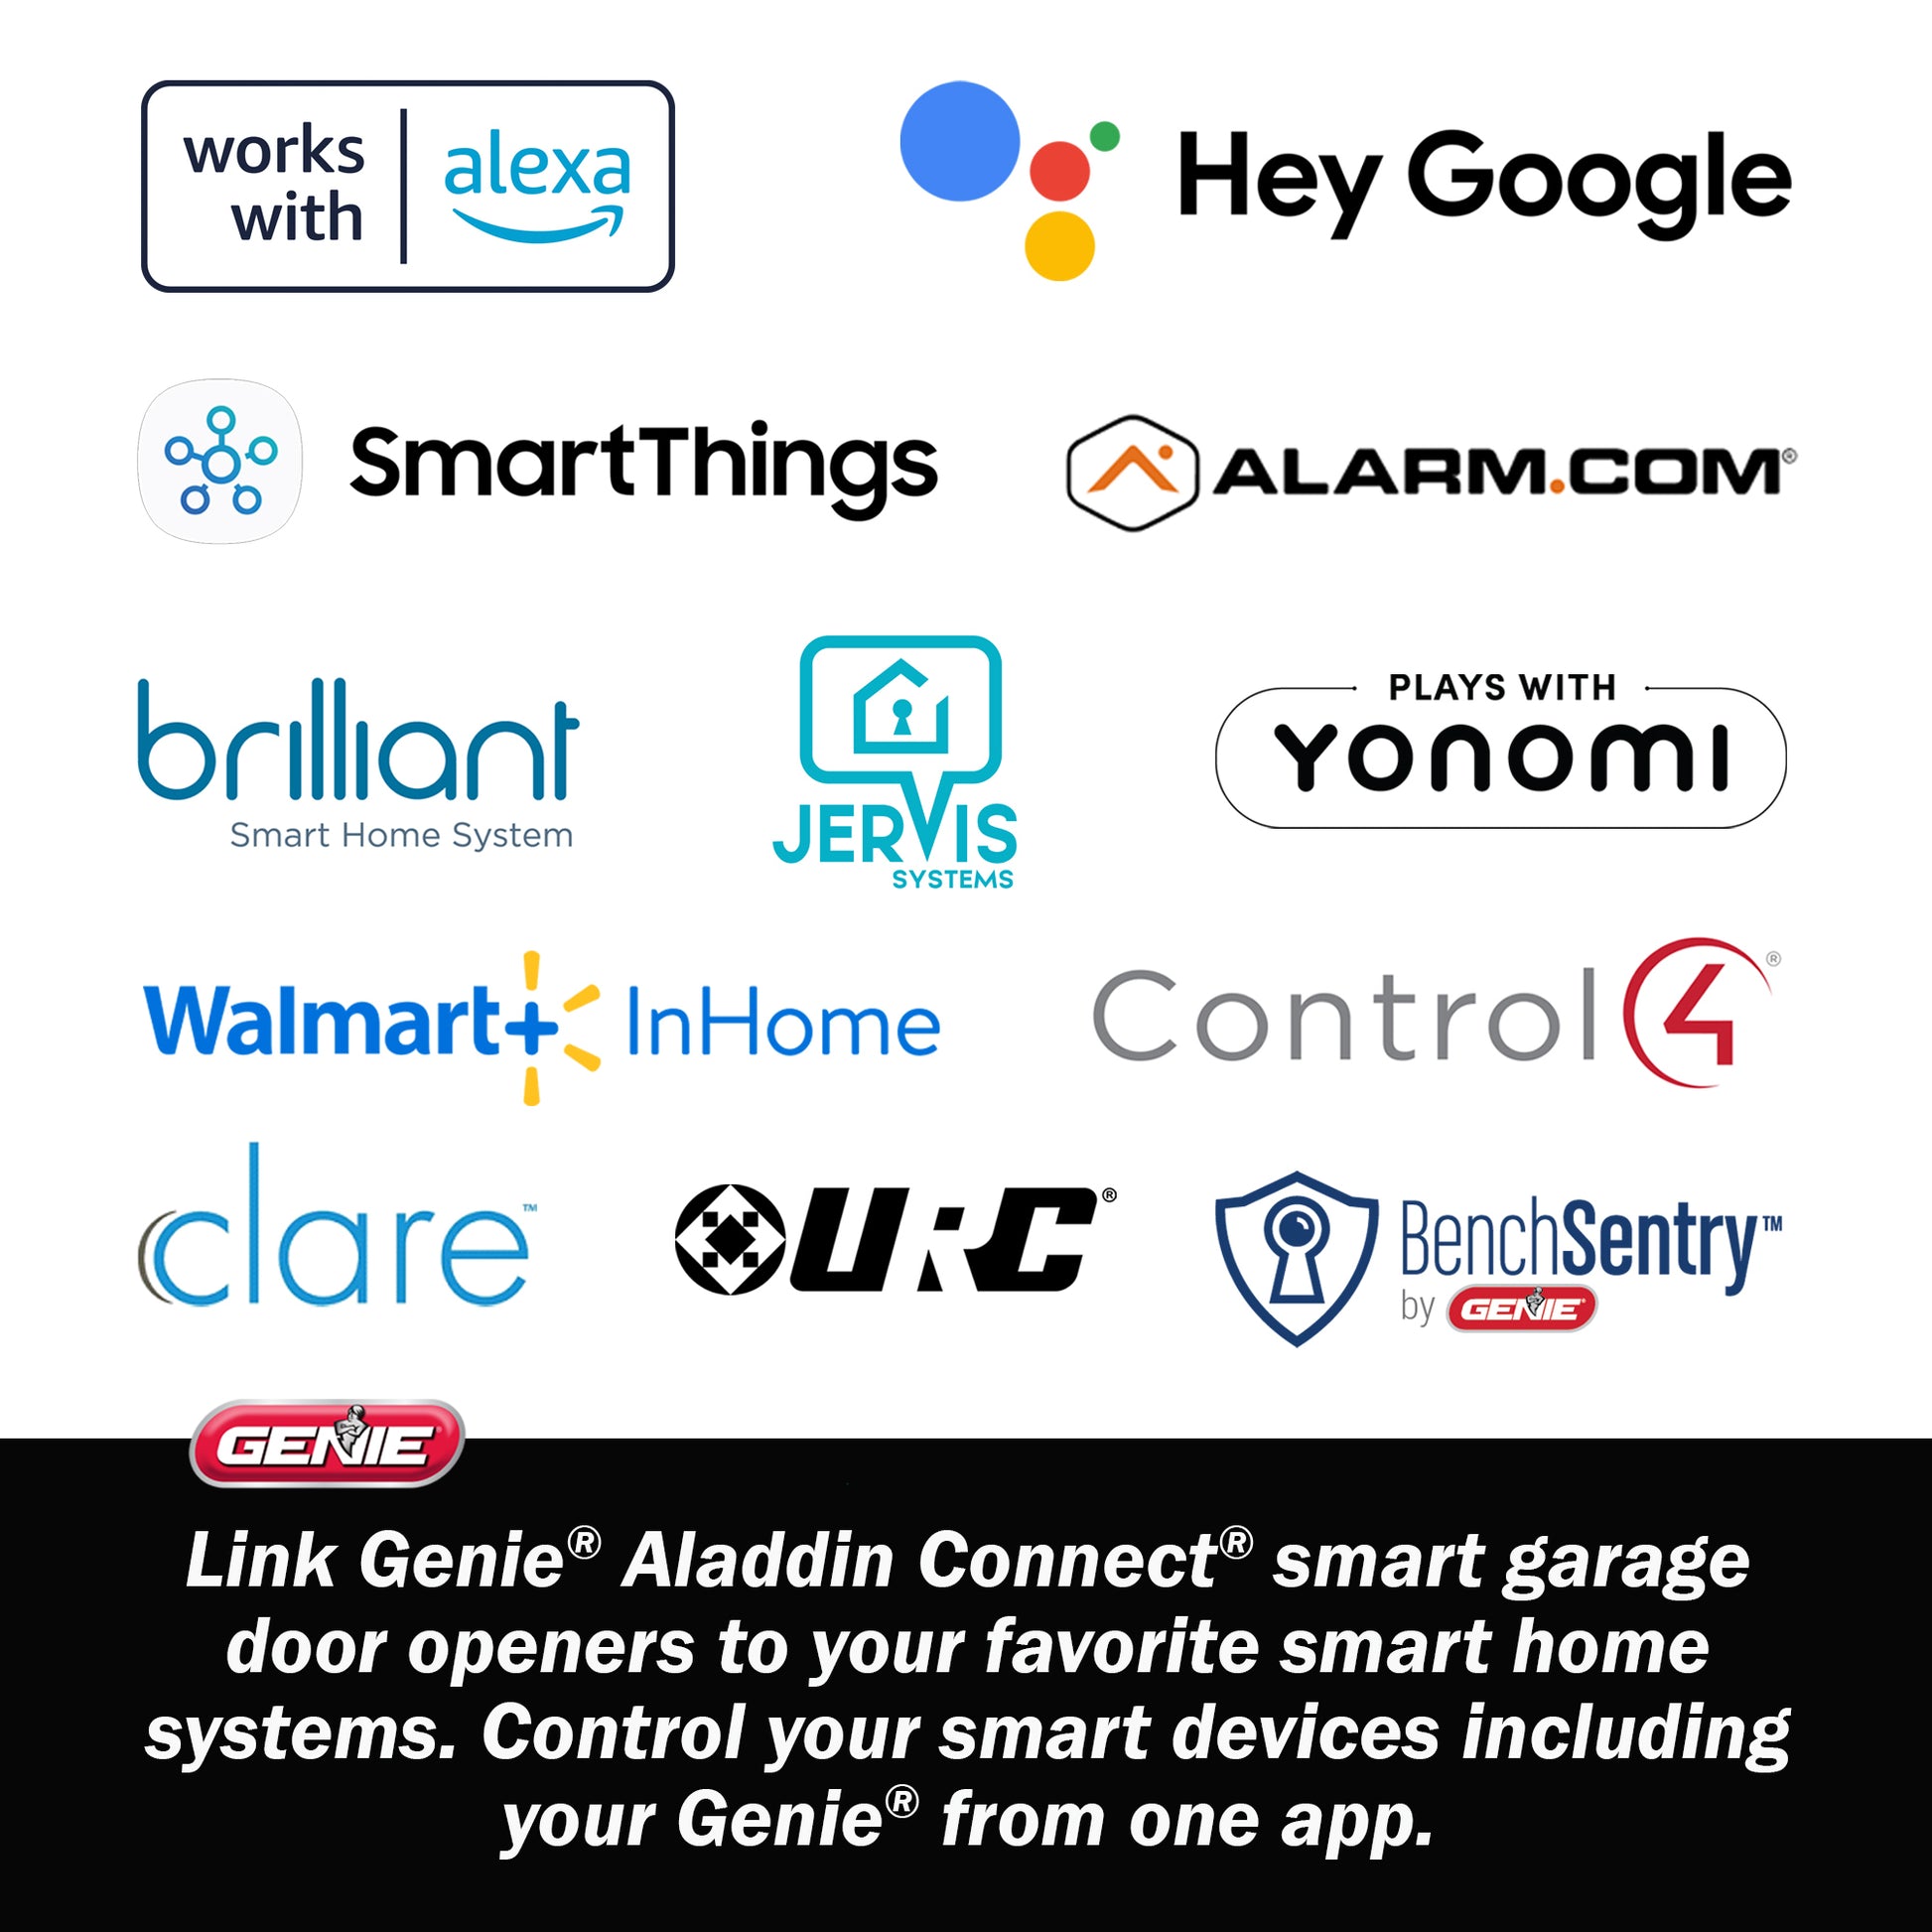 Link Genie Aladdin Connect smart garage door openers to other smart home systems_Amazon Alexa_Hey Google_Smart Things and more